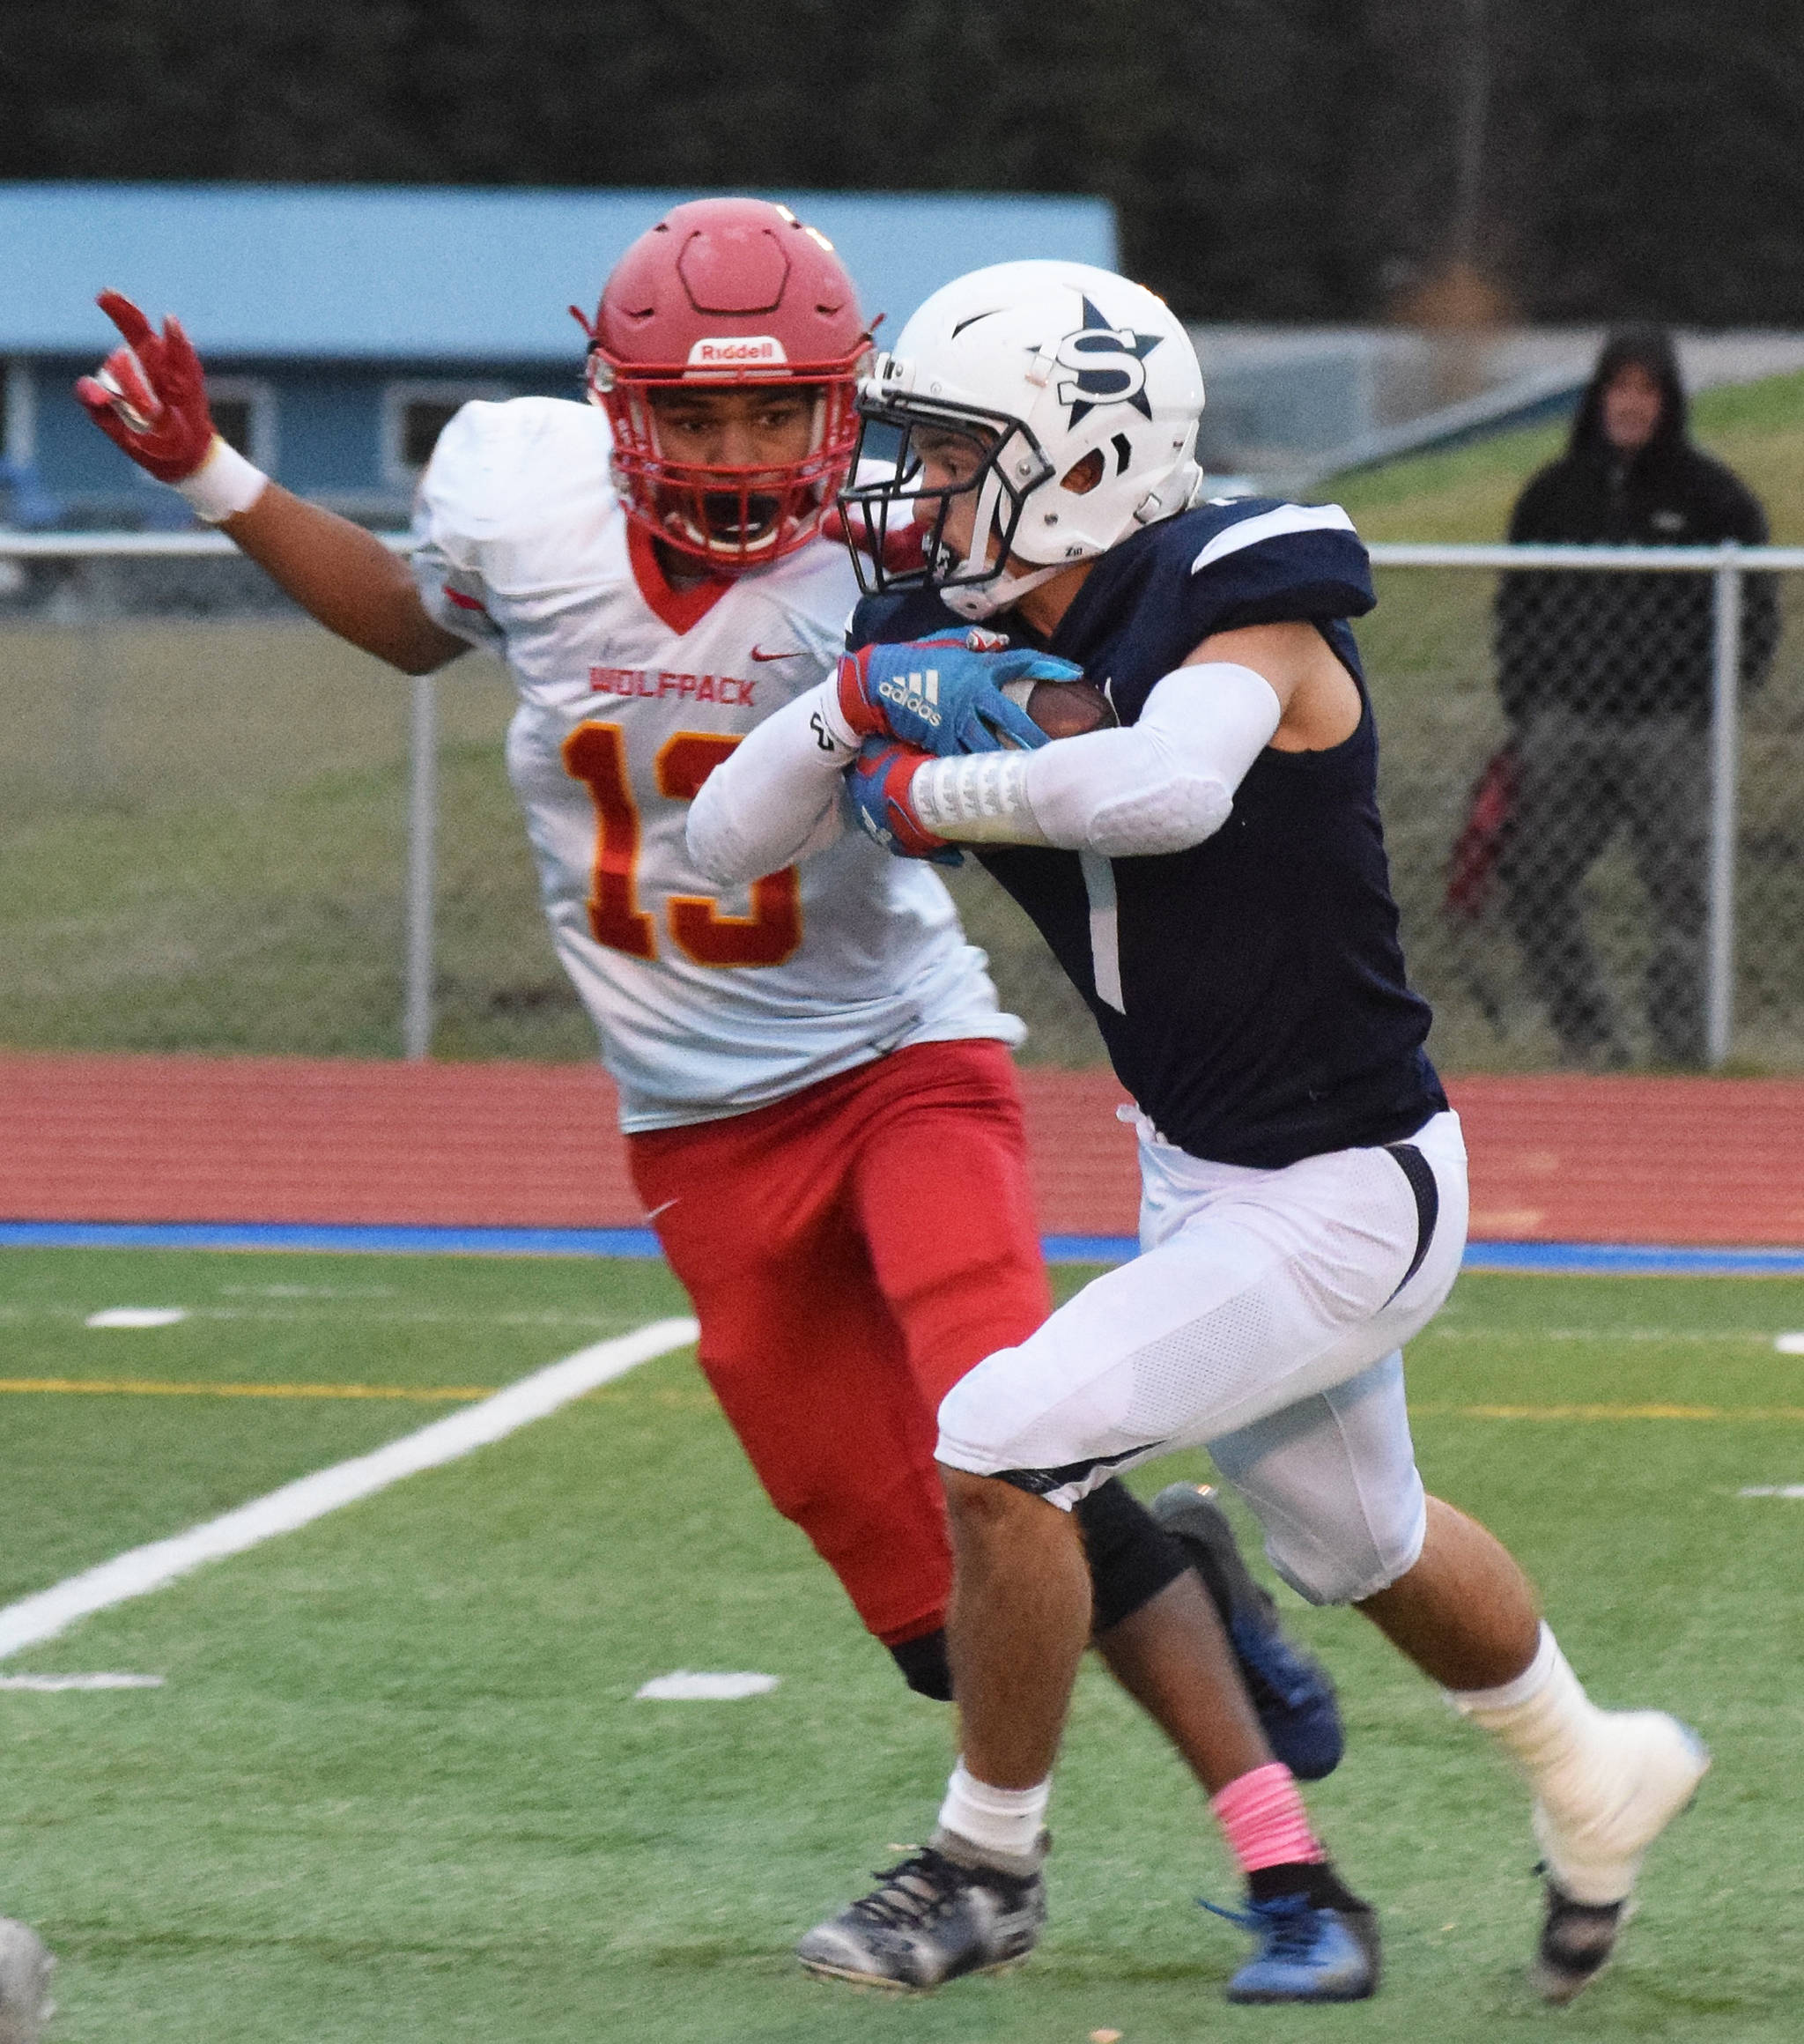 Soldotna’s Wyatt Medcoff slips through the West Valley defense in a Div. II state semifinal Friday, Oct. 11, 2019, in Soldotna, Alaska. (Photo by Joey Klecka/Peninsula Clarion)